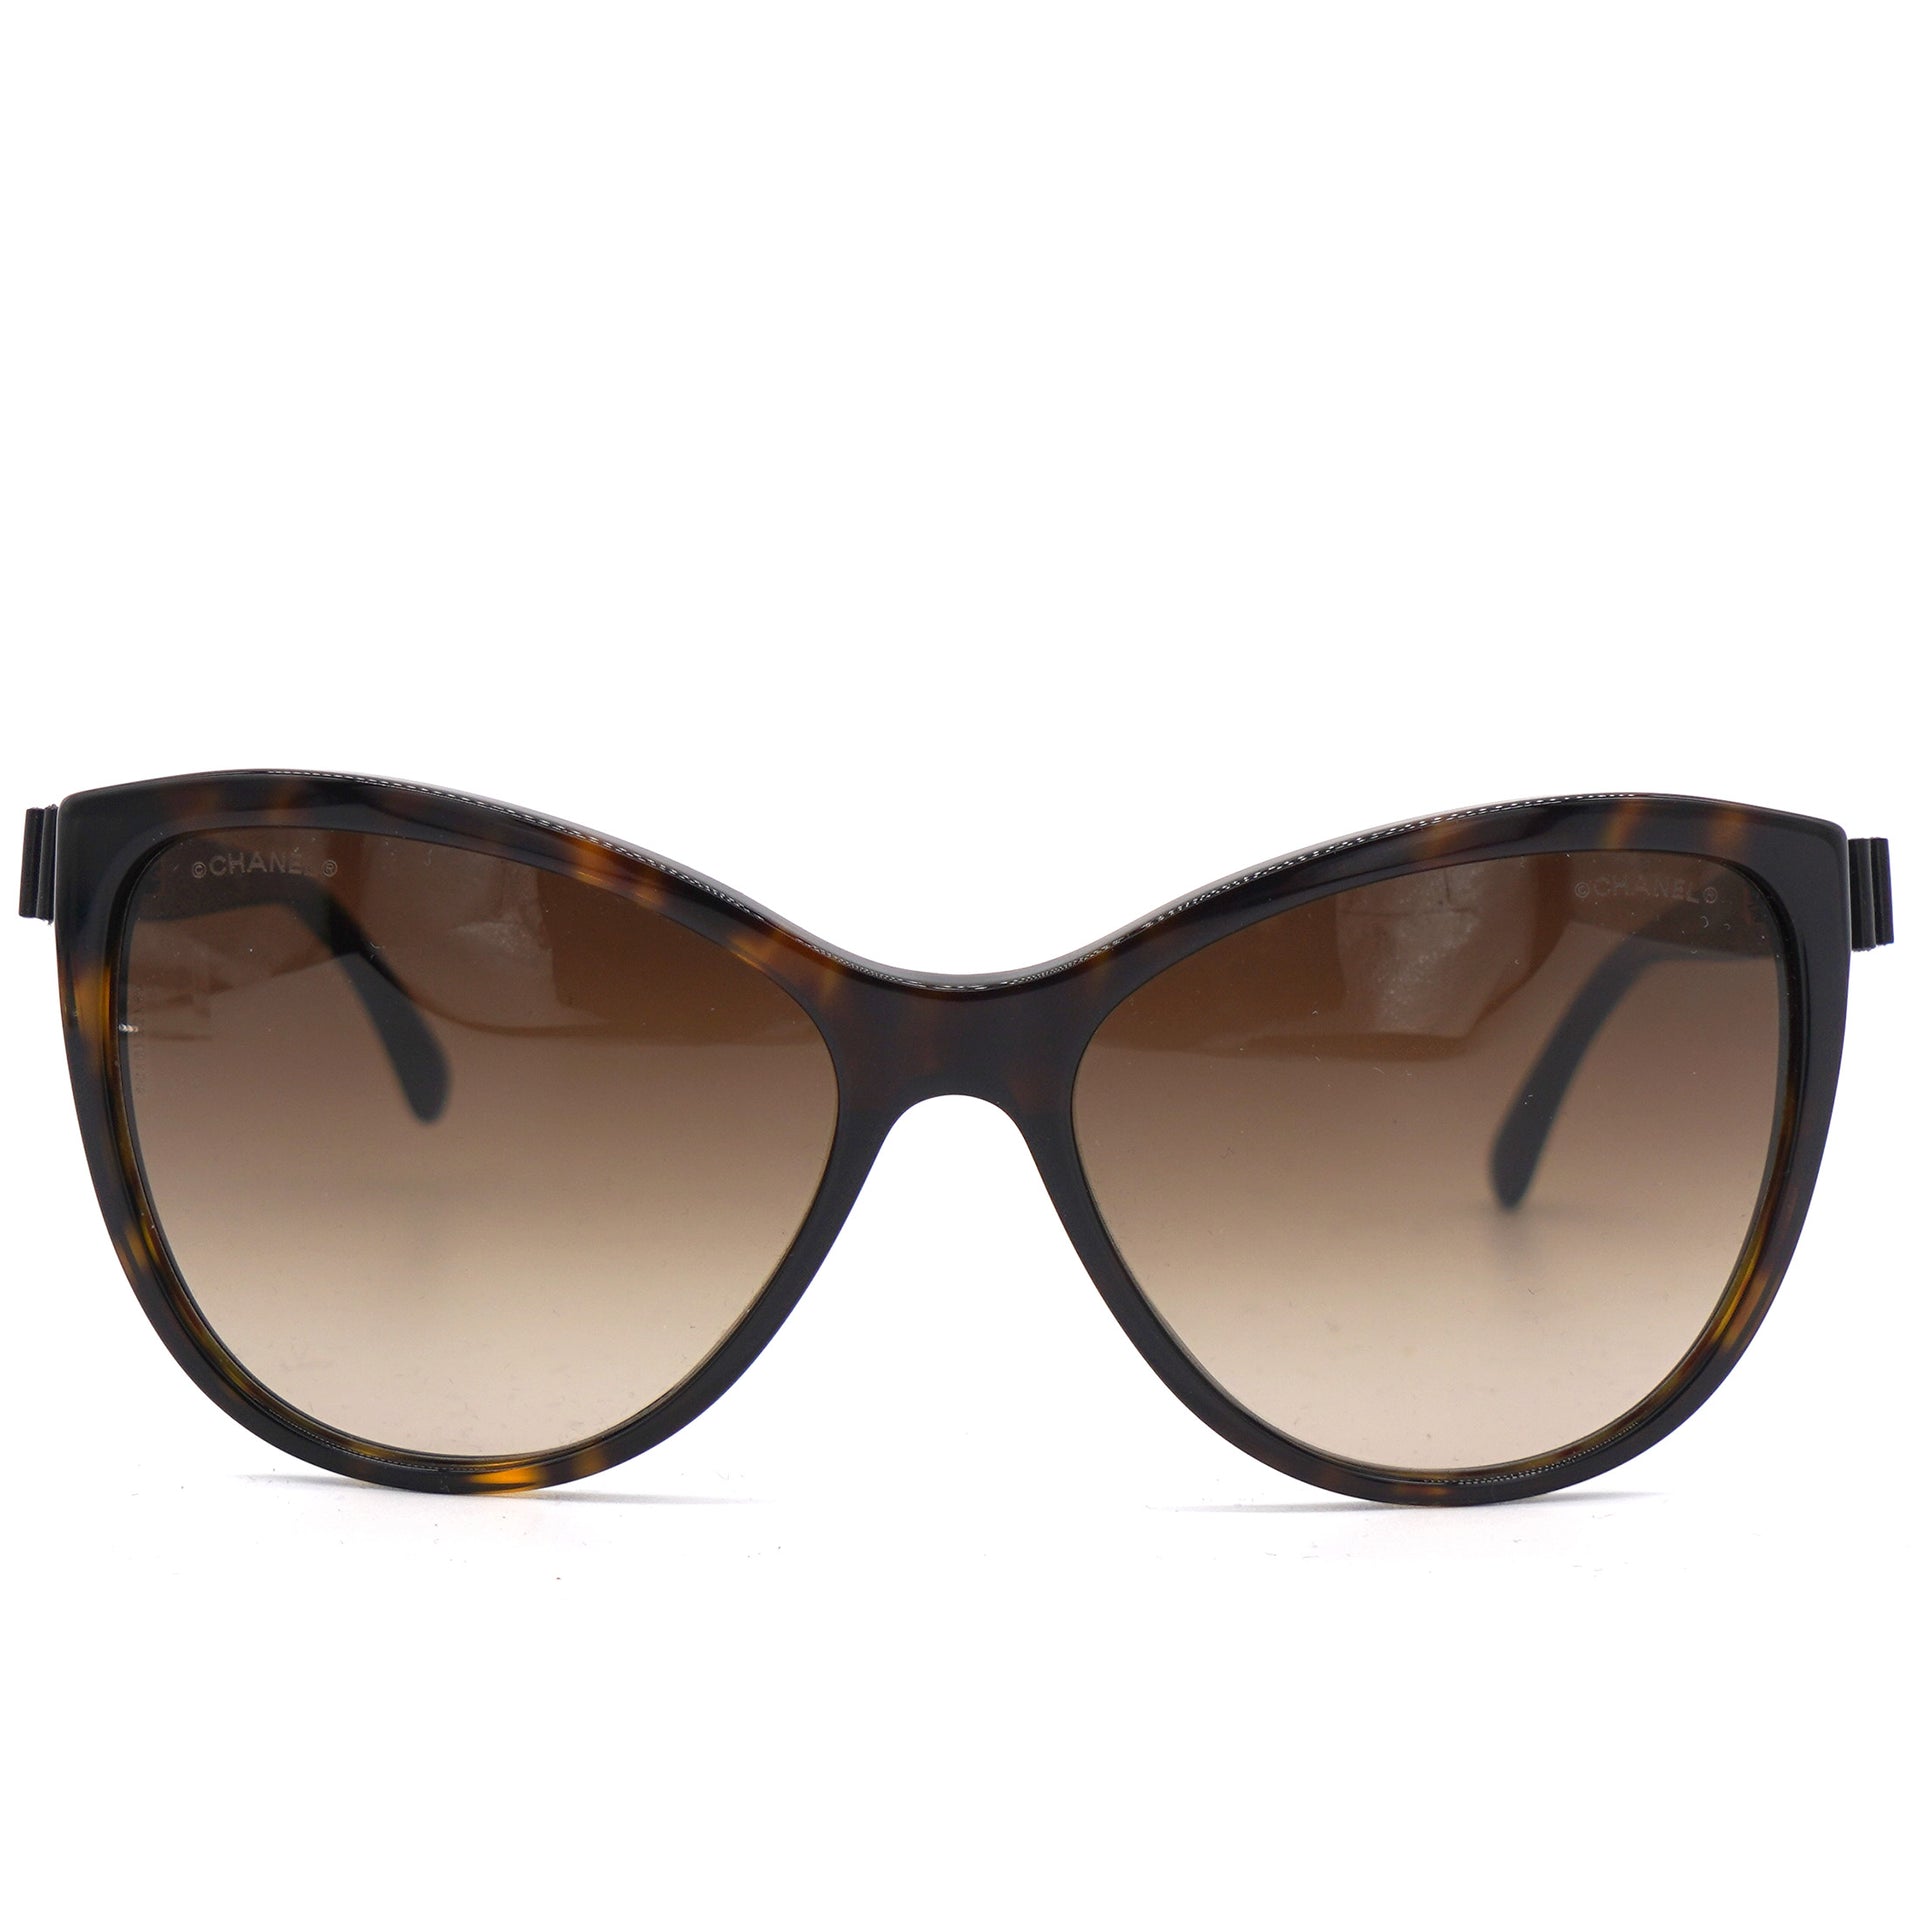 Butterfly Charms Sunglasses 5281 Tortoise Brown